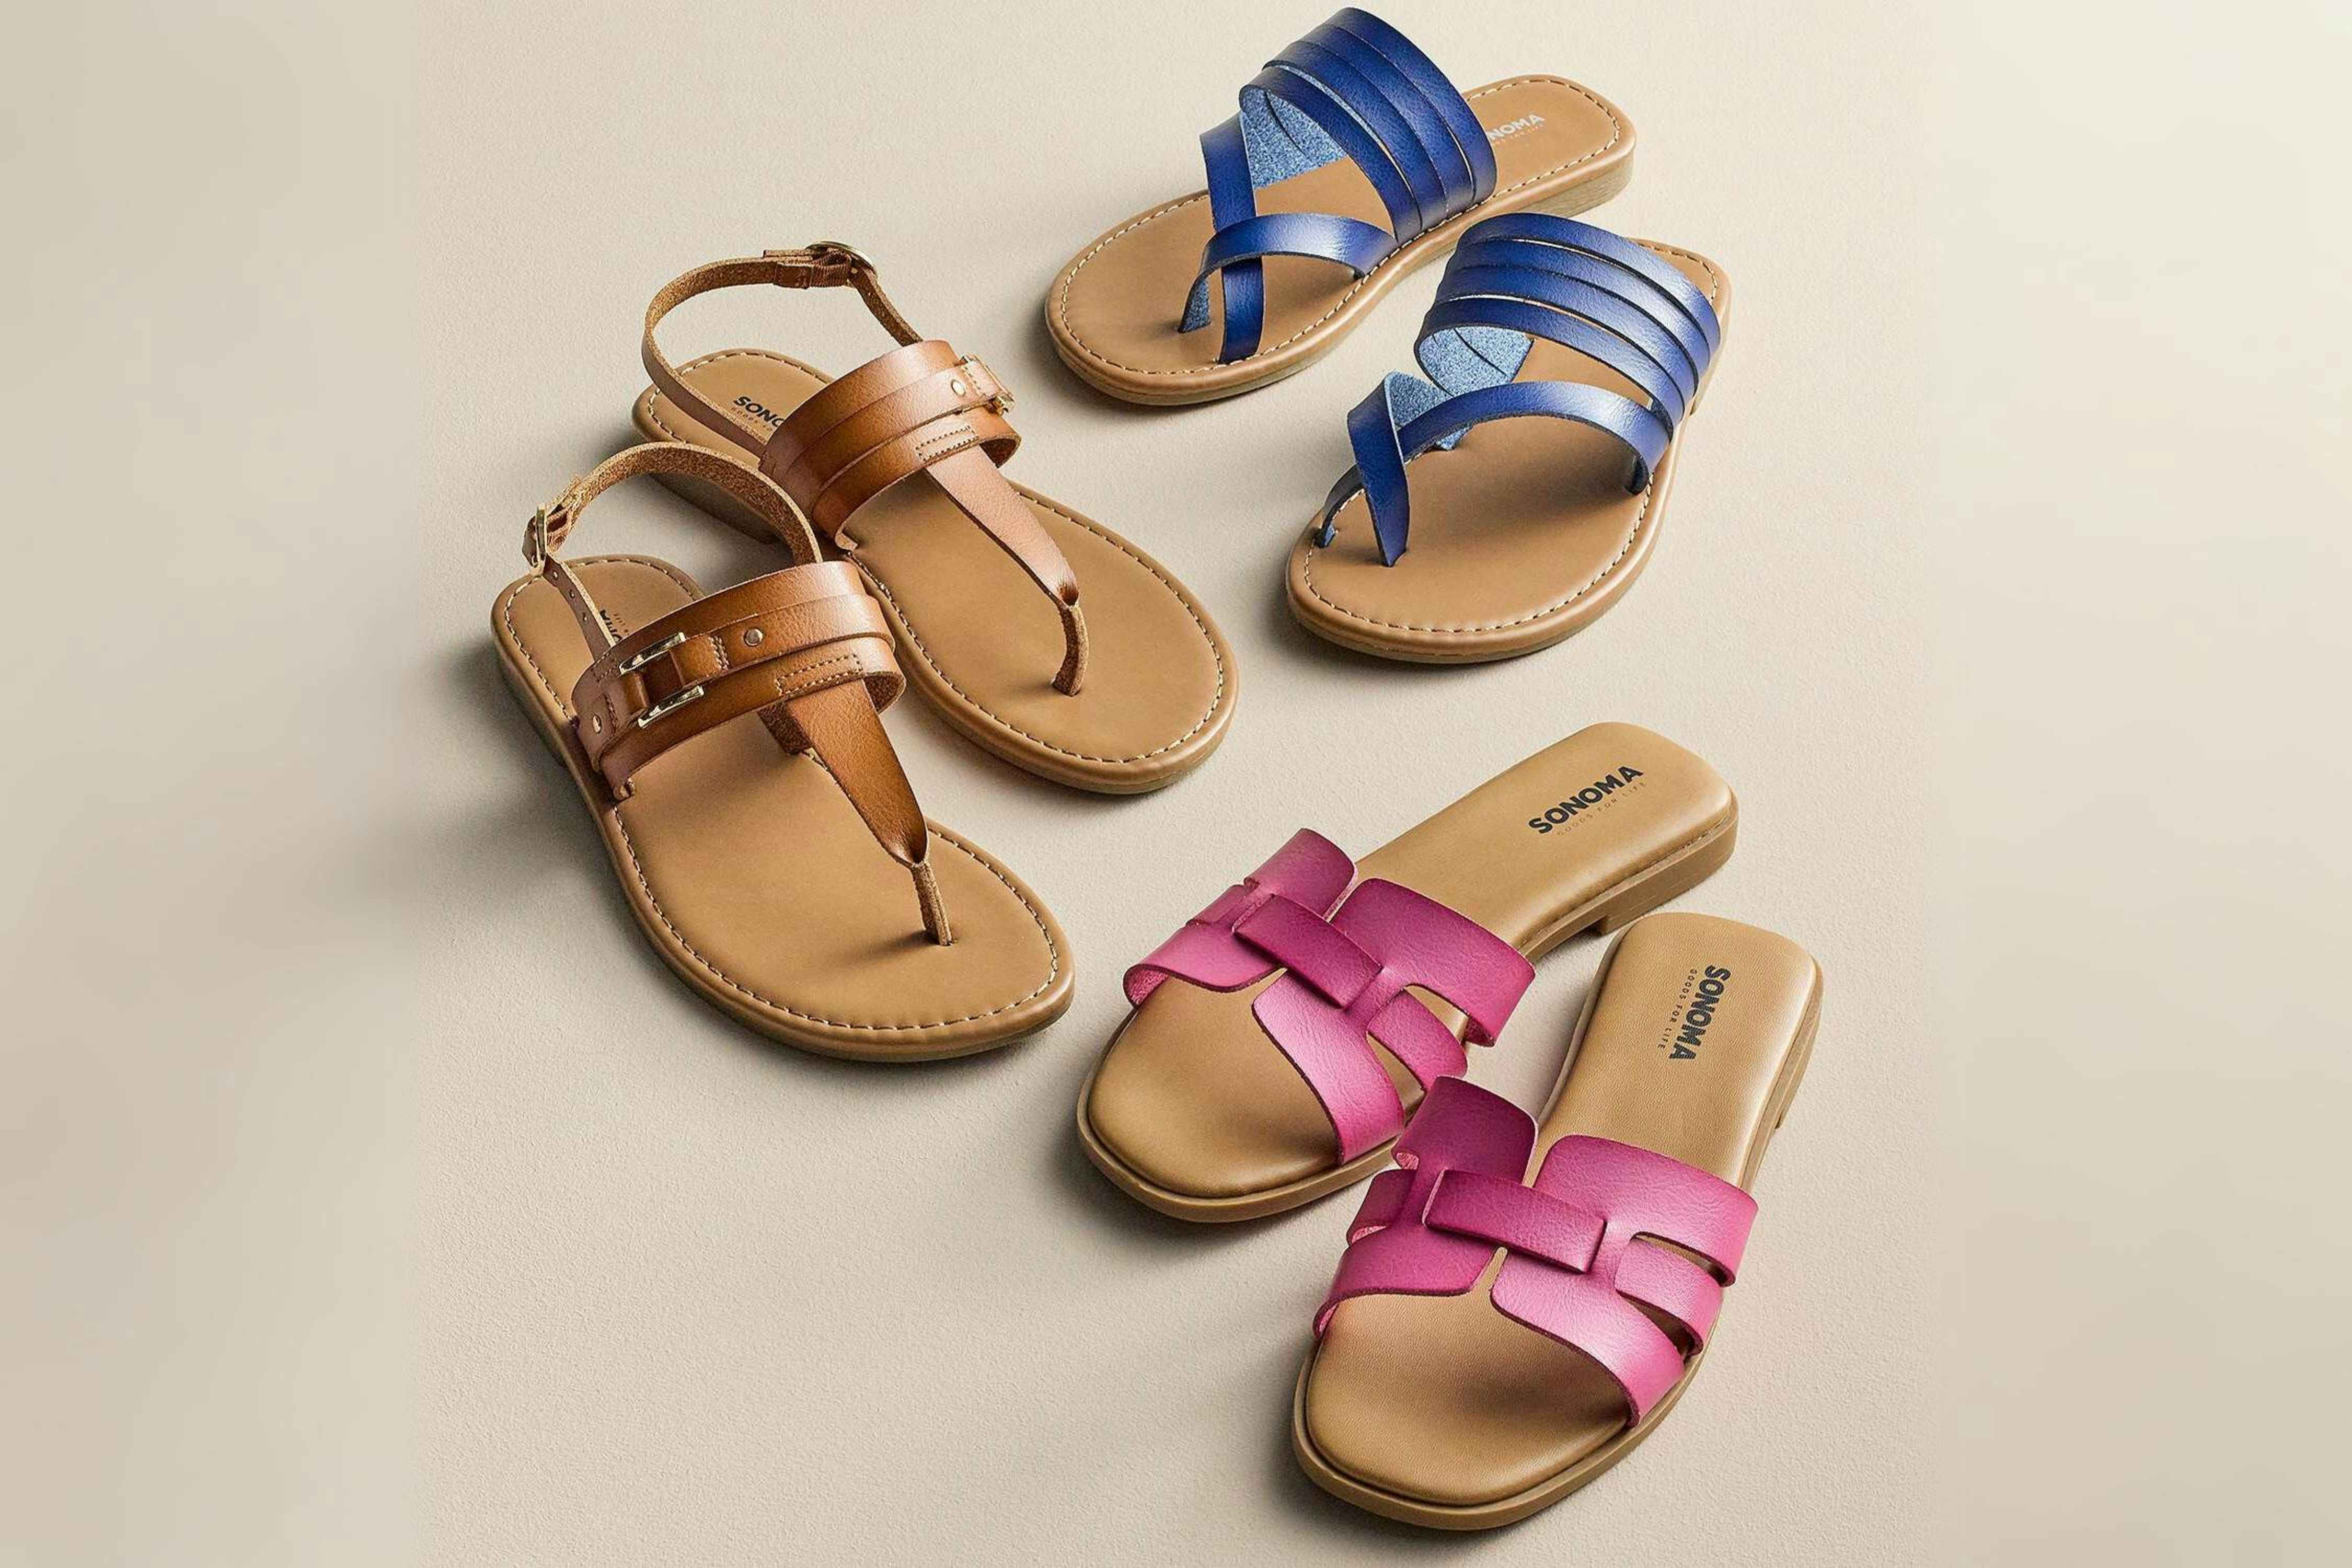 Women's Sandals, Just $16 at Kohl's (As Low as $12 With Kohl's Mystery) 